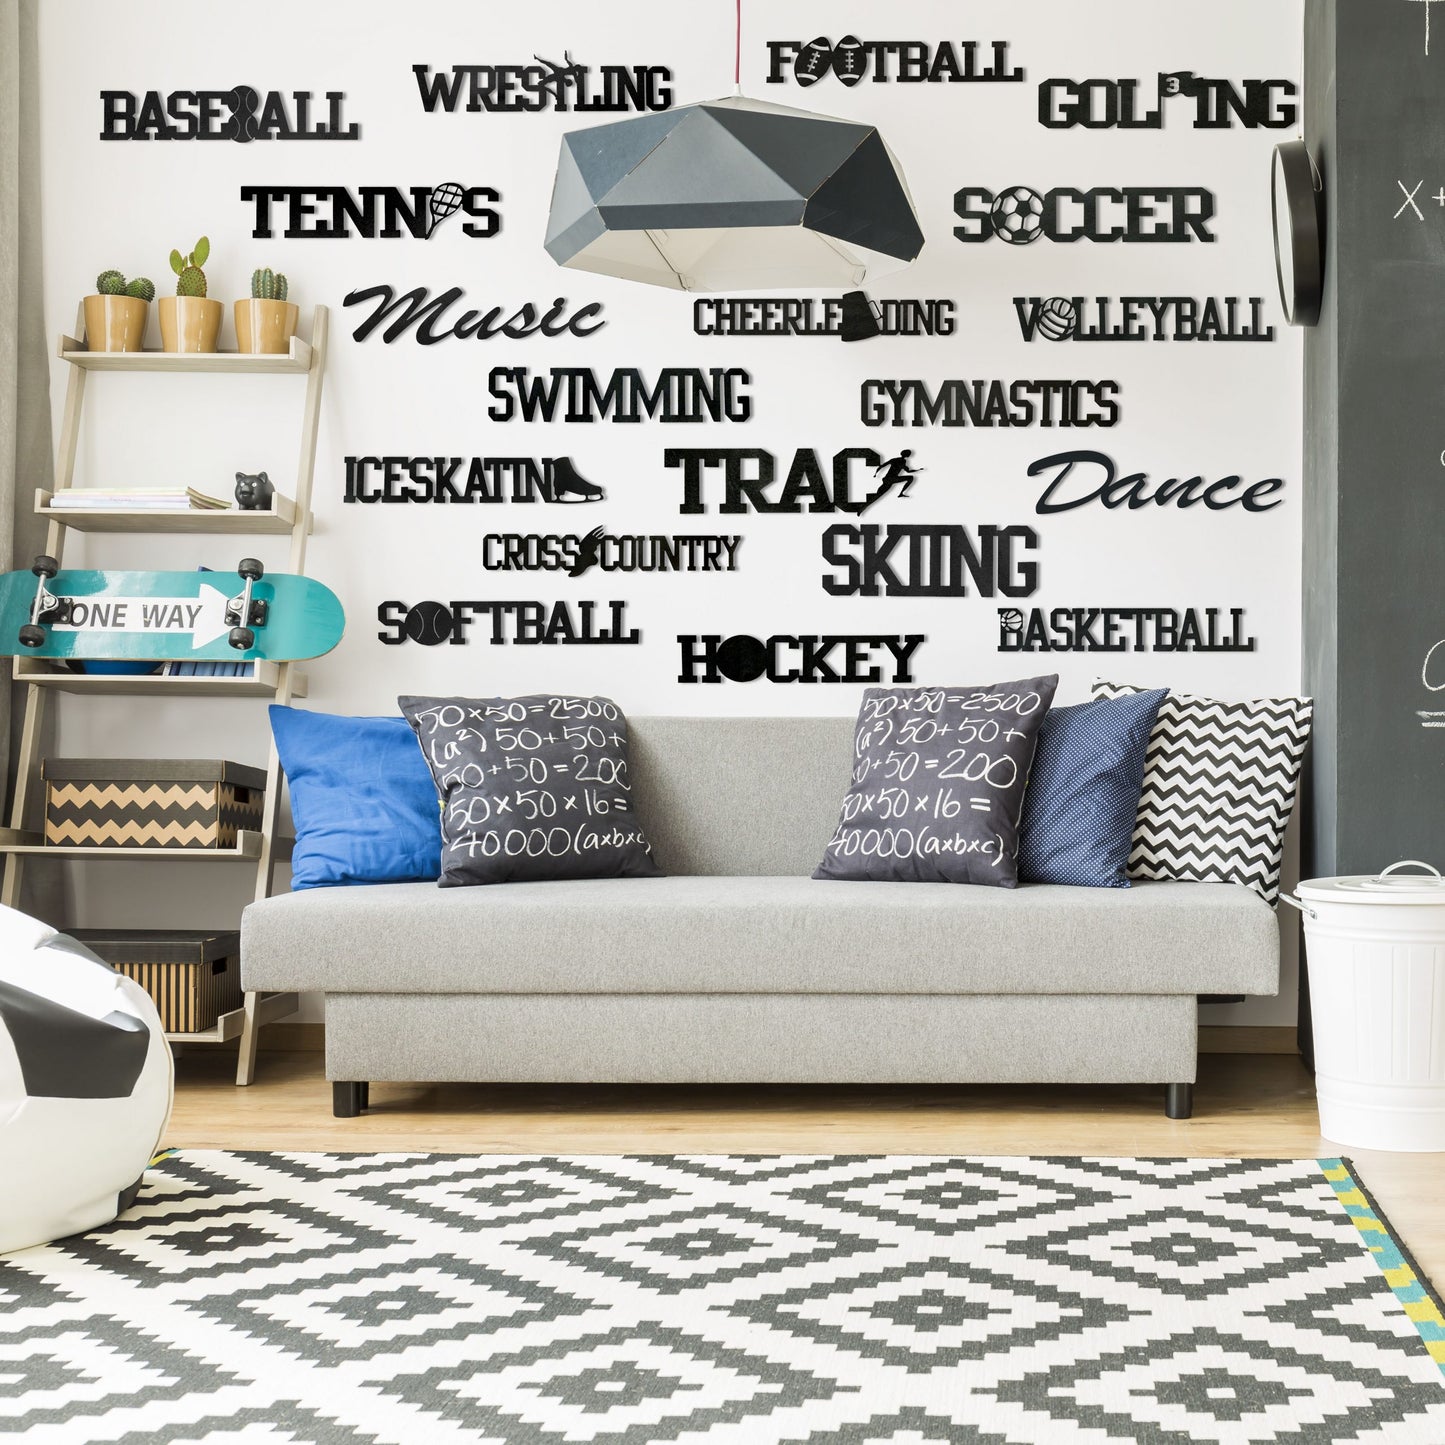 Black-Words-Over-Couch-scaled-11